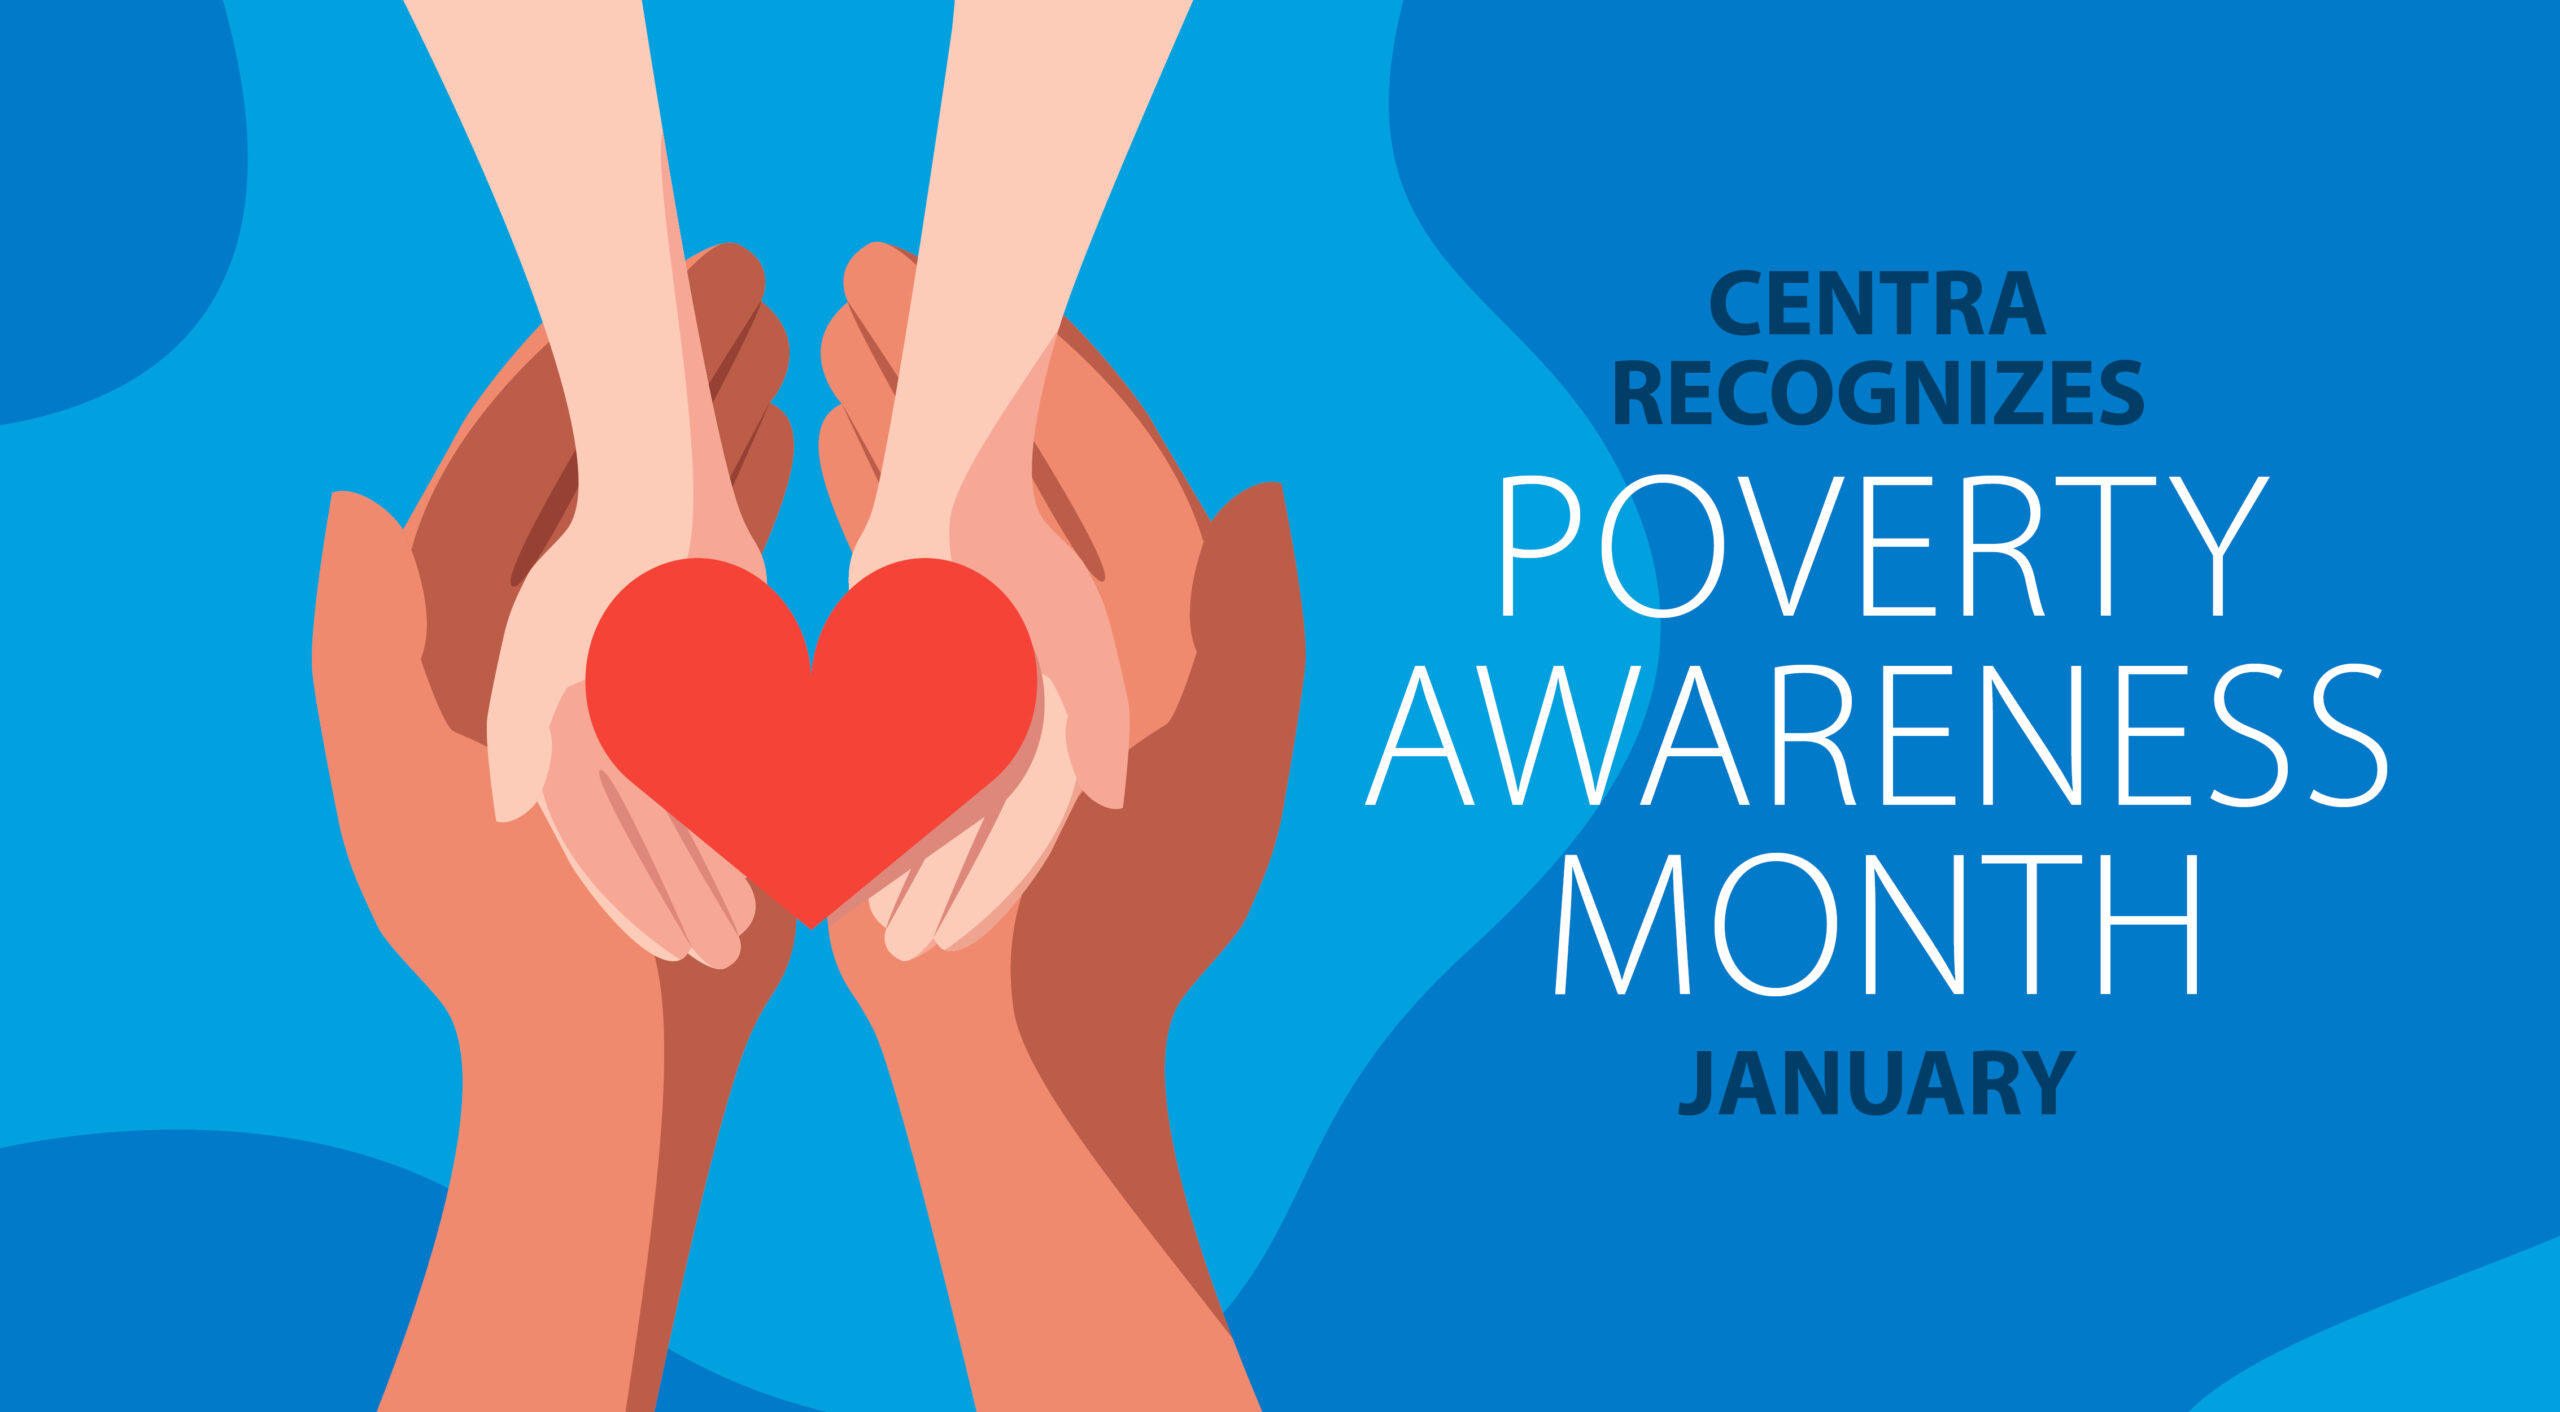 Centra recognizes poverty awareness month